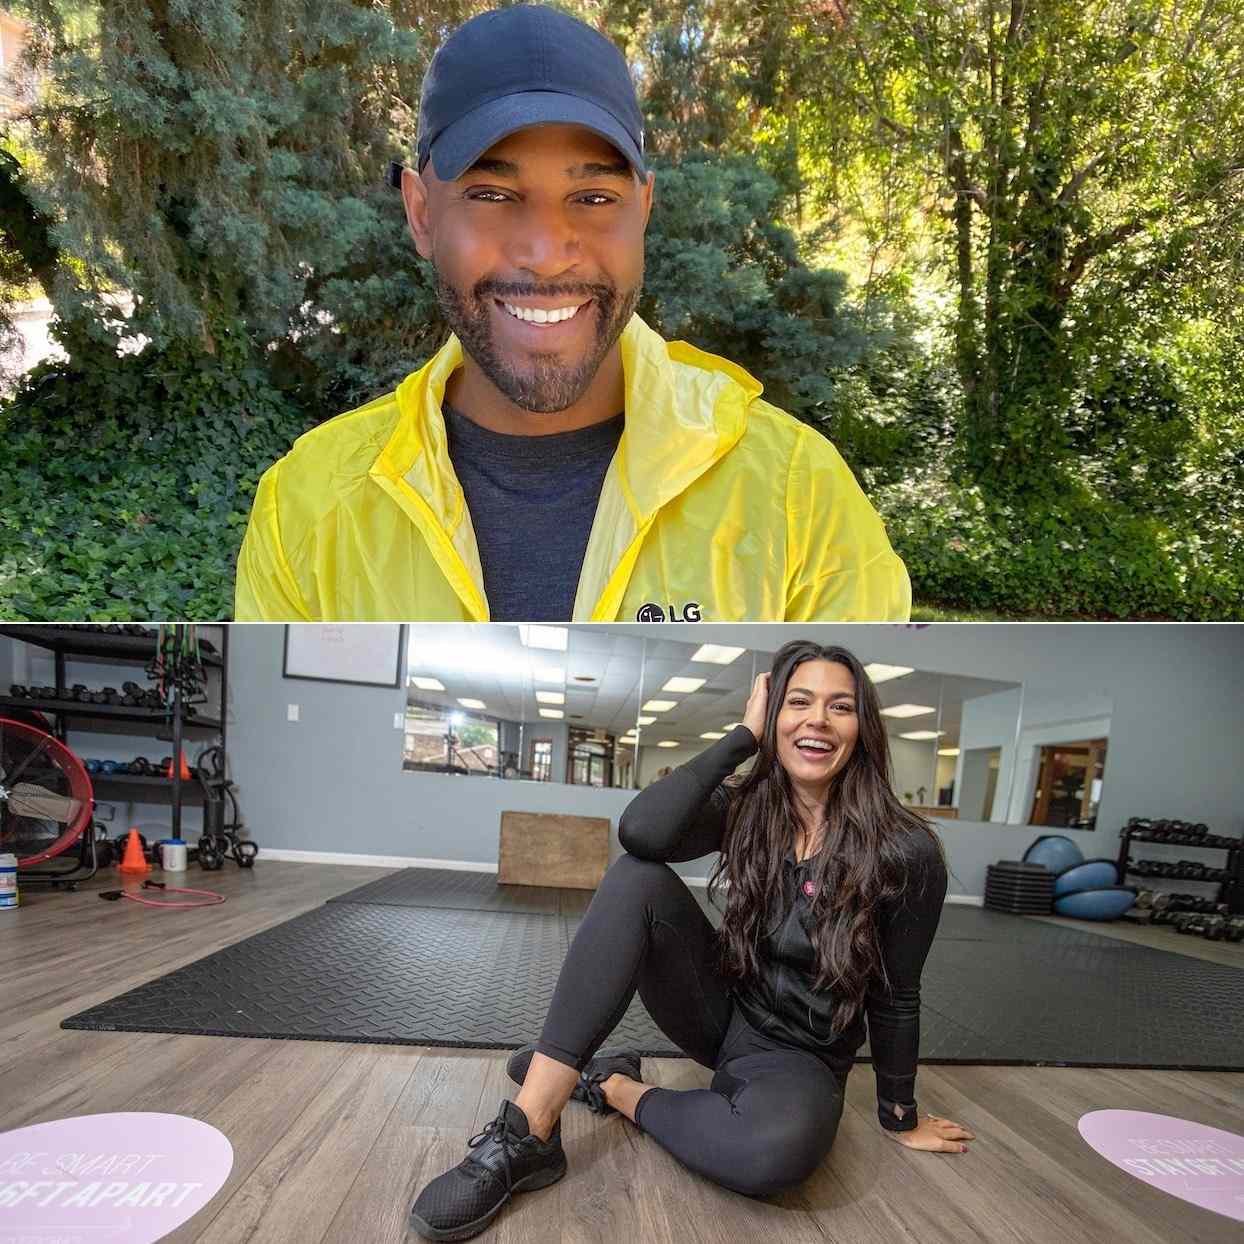 This Virtual 5K Lets You Run with Karamo Brown and Erica Lugo While Supporting COVID-19 Relief